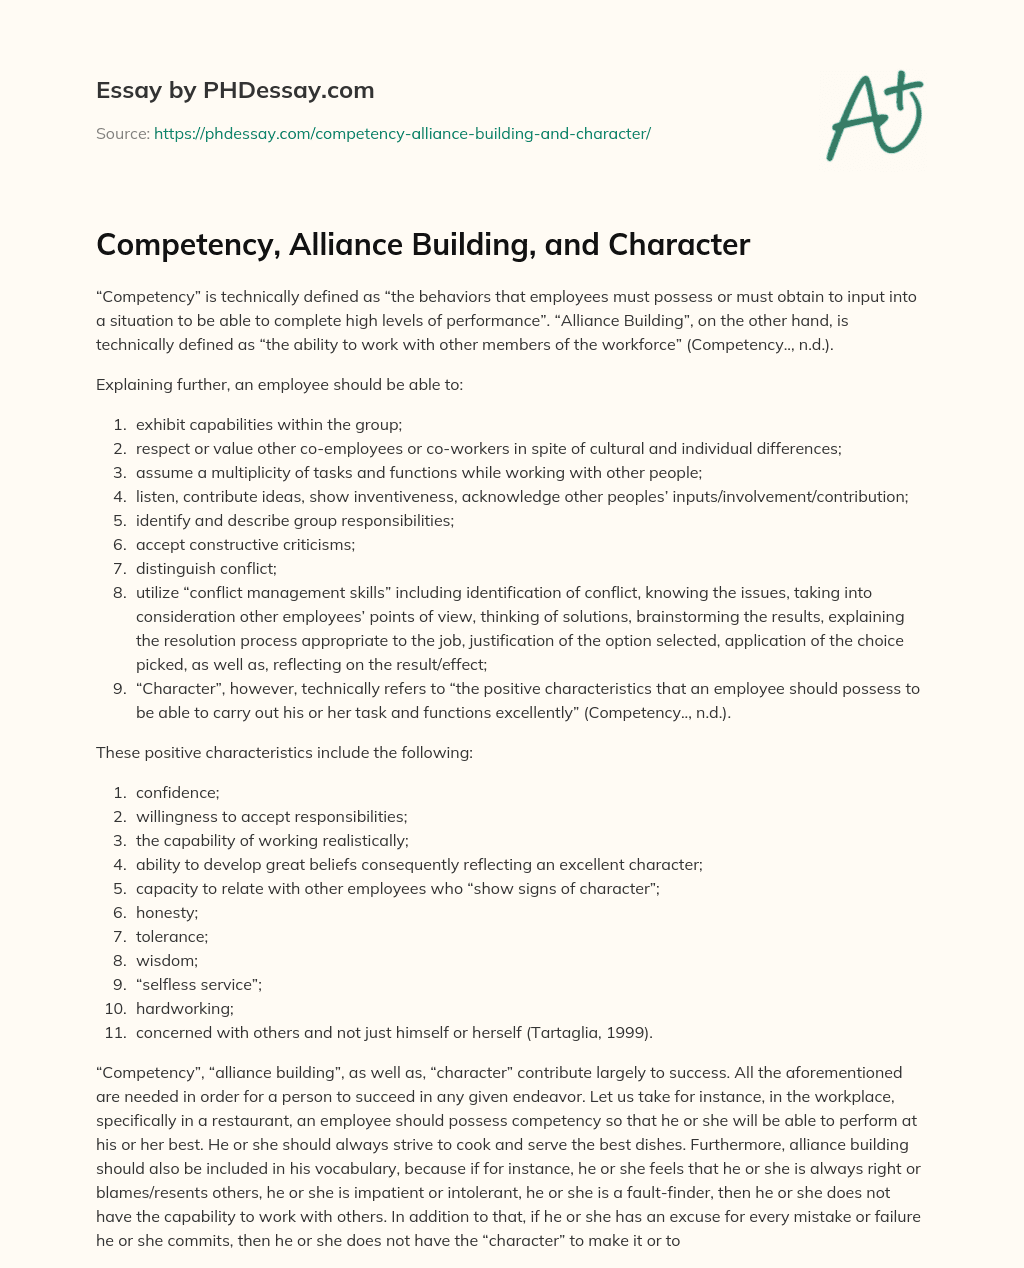 Competency, Alliance Building, and Character essay